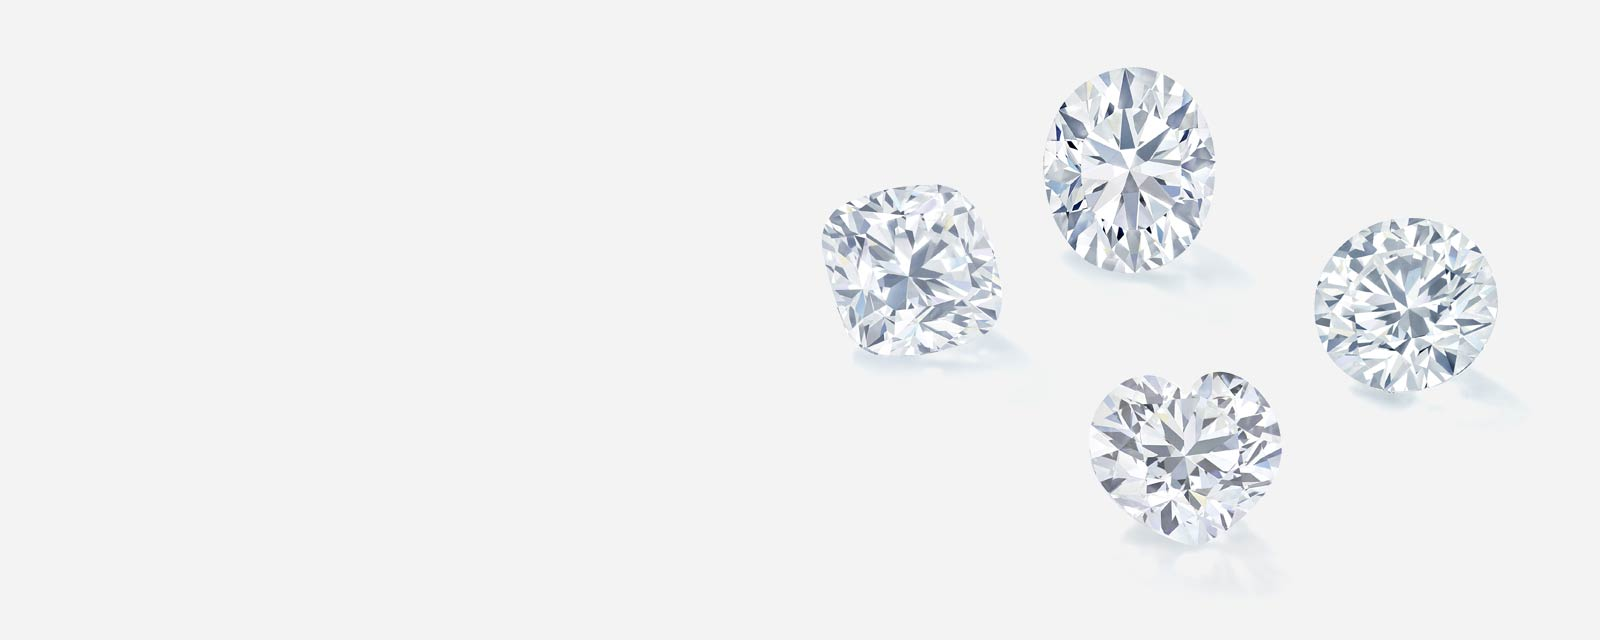 Shop Ethical and eco-sourced diamonds online or in-store at Morin Jewelers Southbridge, MA